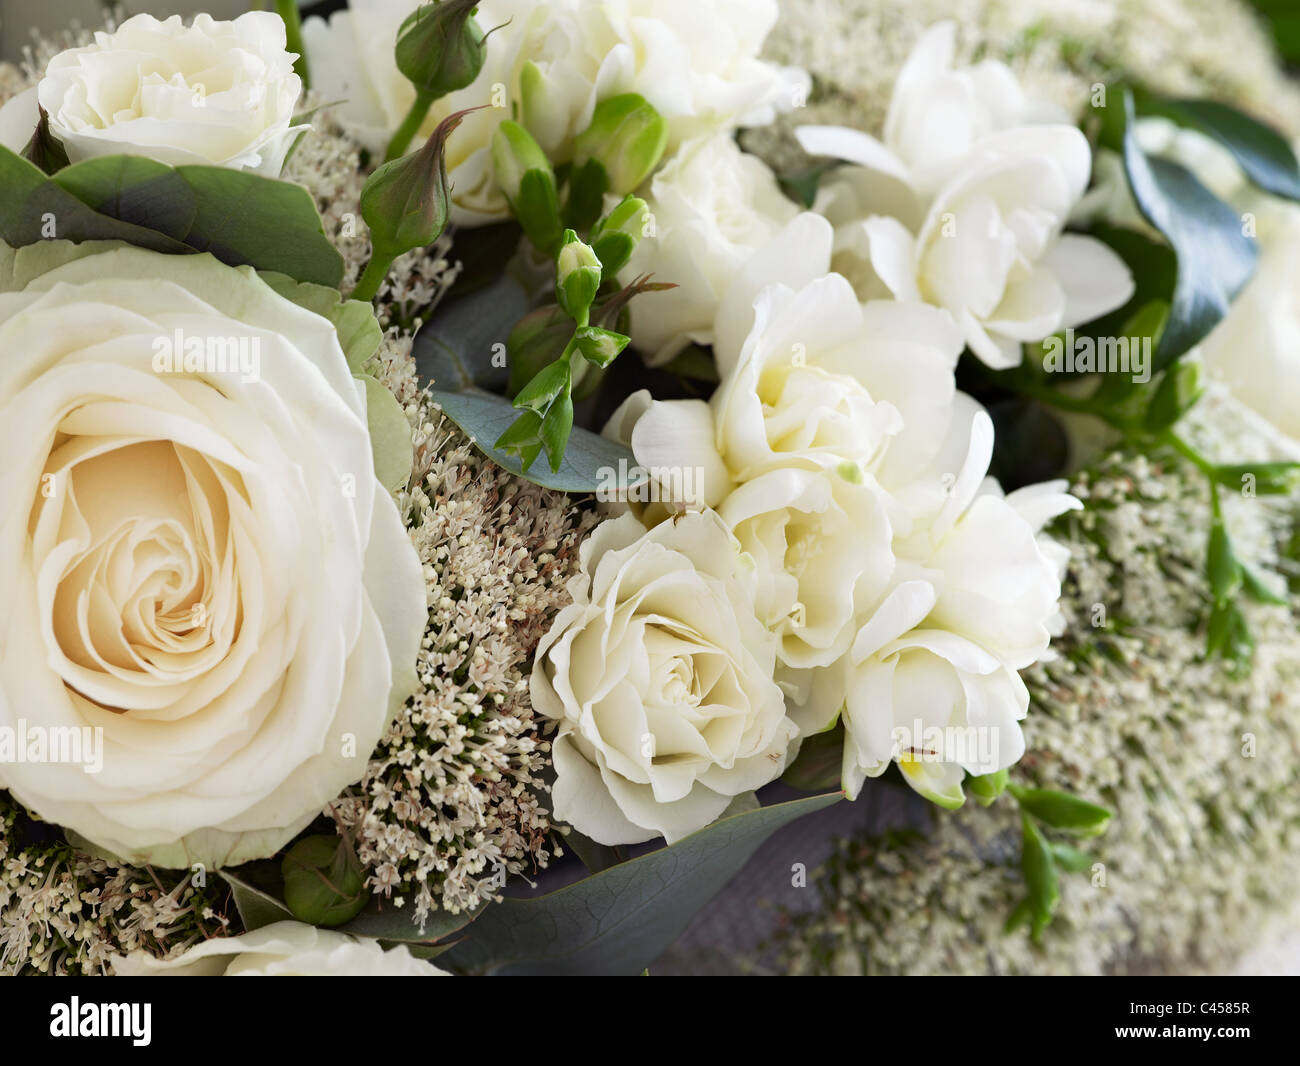 Bunch of flowers including white roses, close-up Stock Photo